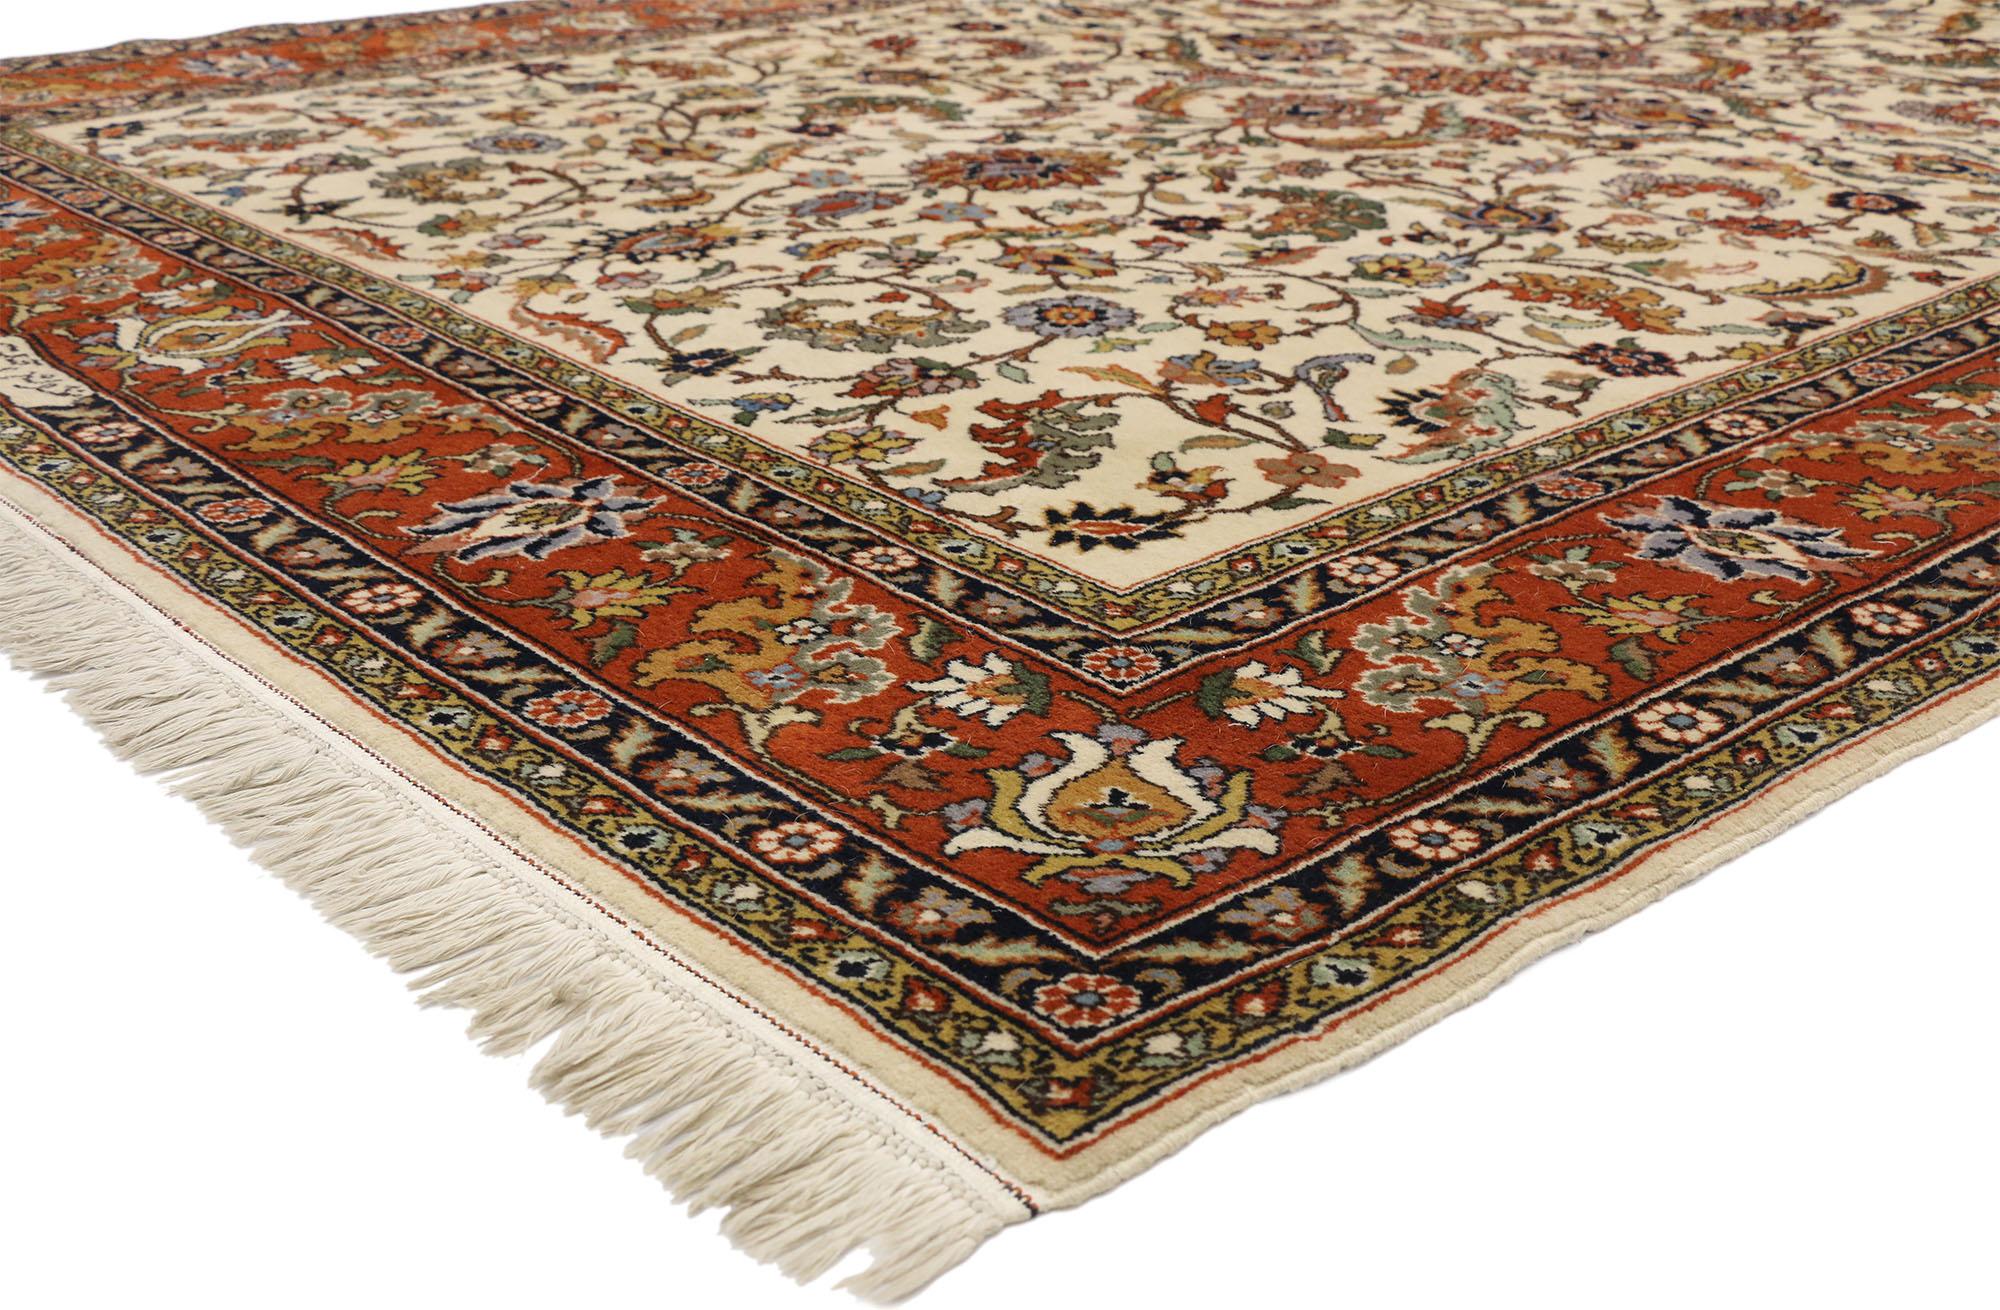 77223 Vintage Romanian Rug, 08'04 x 12'00.
Casual elegance meets stylish durability in this vintage Romanian rug. The decorative detailing an warm earth-tone colors woven into this piece work together creating a soft and sophisticated look. An